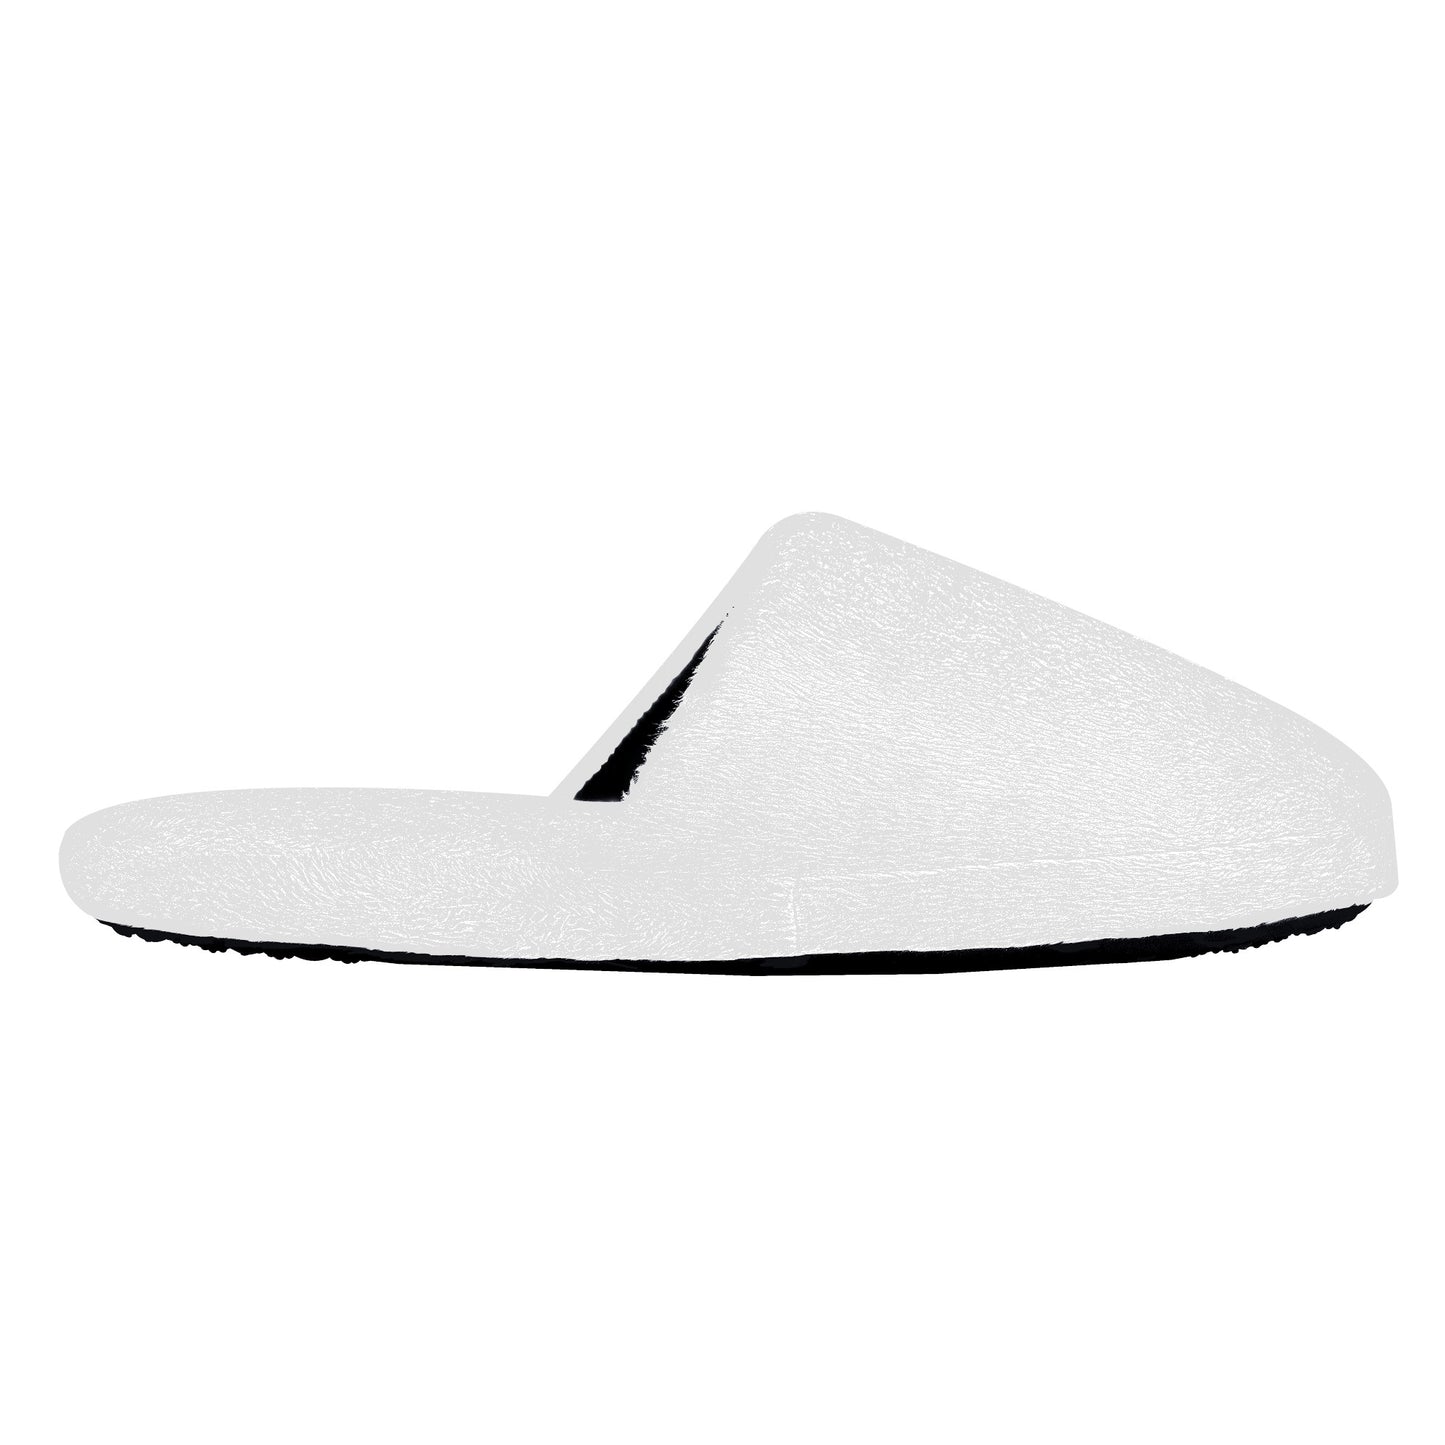 Create Your Own - Slippers - Adult and Kids Sizes